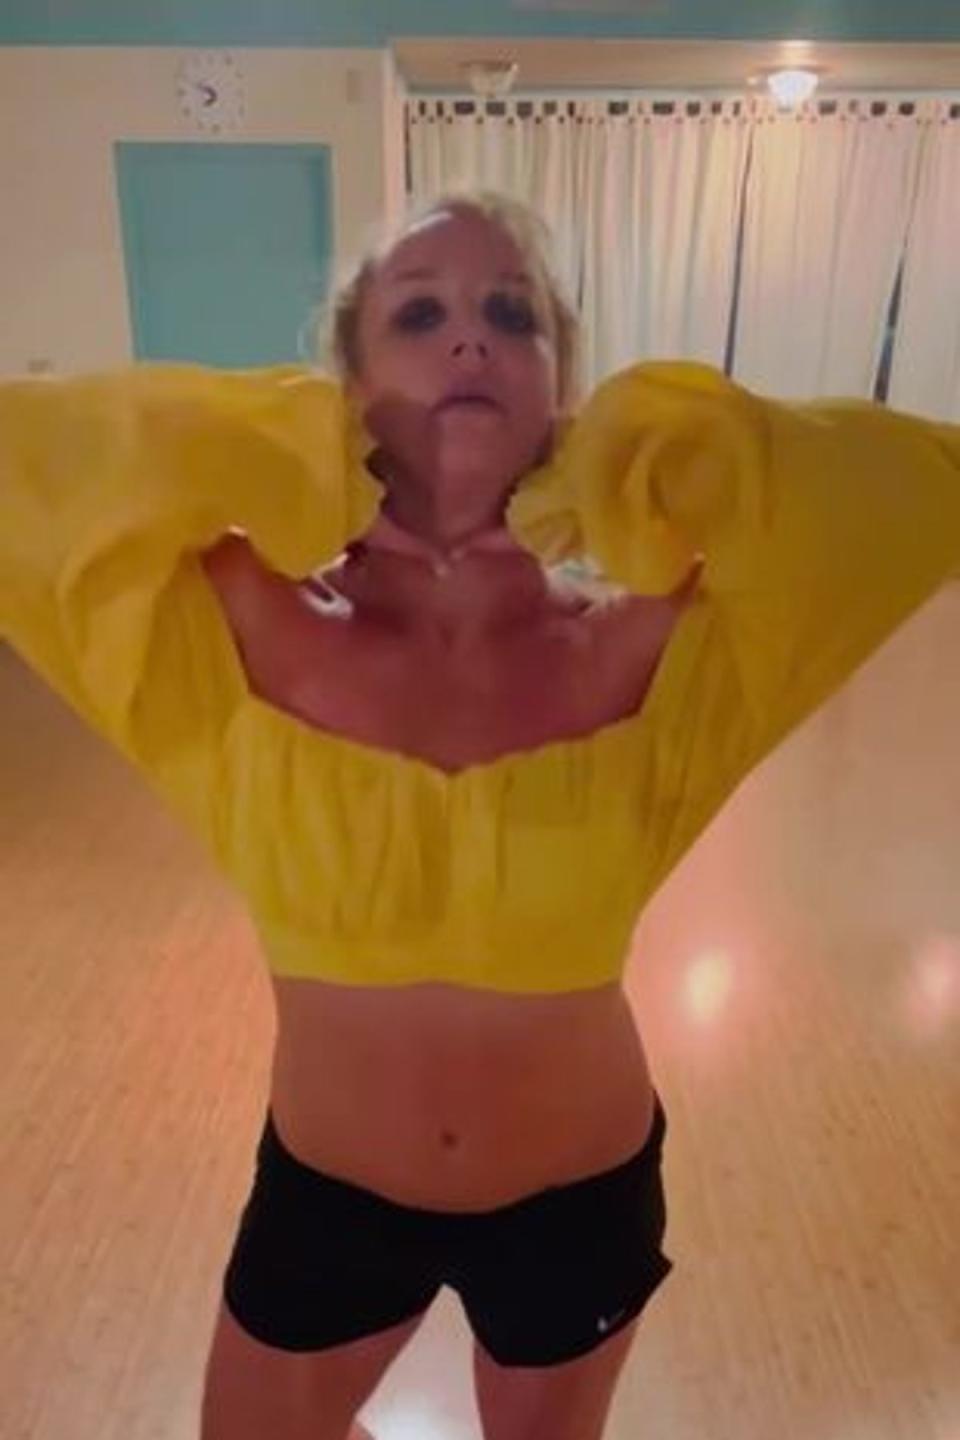 Britney, pictured pretending to choke herself in an Instagram video, has been worrying fans with her erratic behaviour on social media (Instagram/BritneySpears)